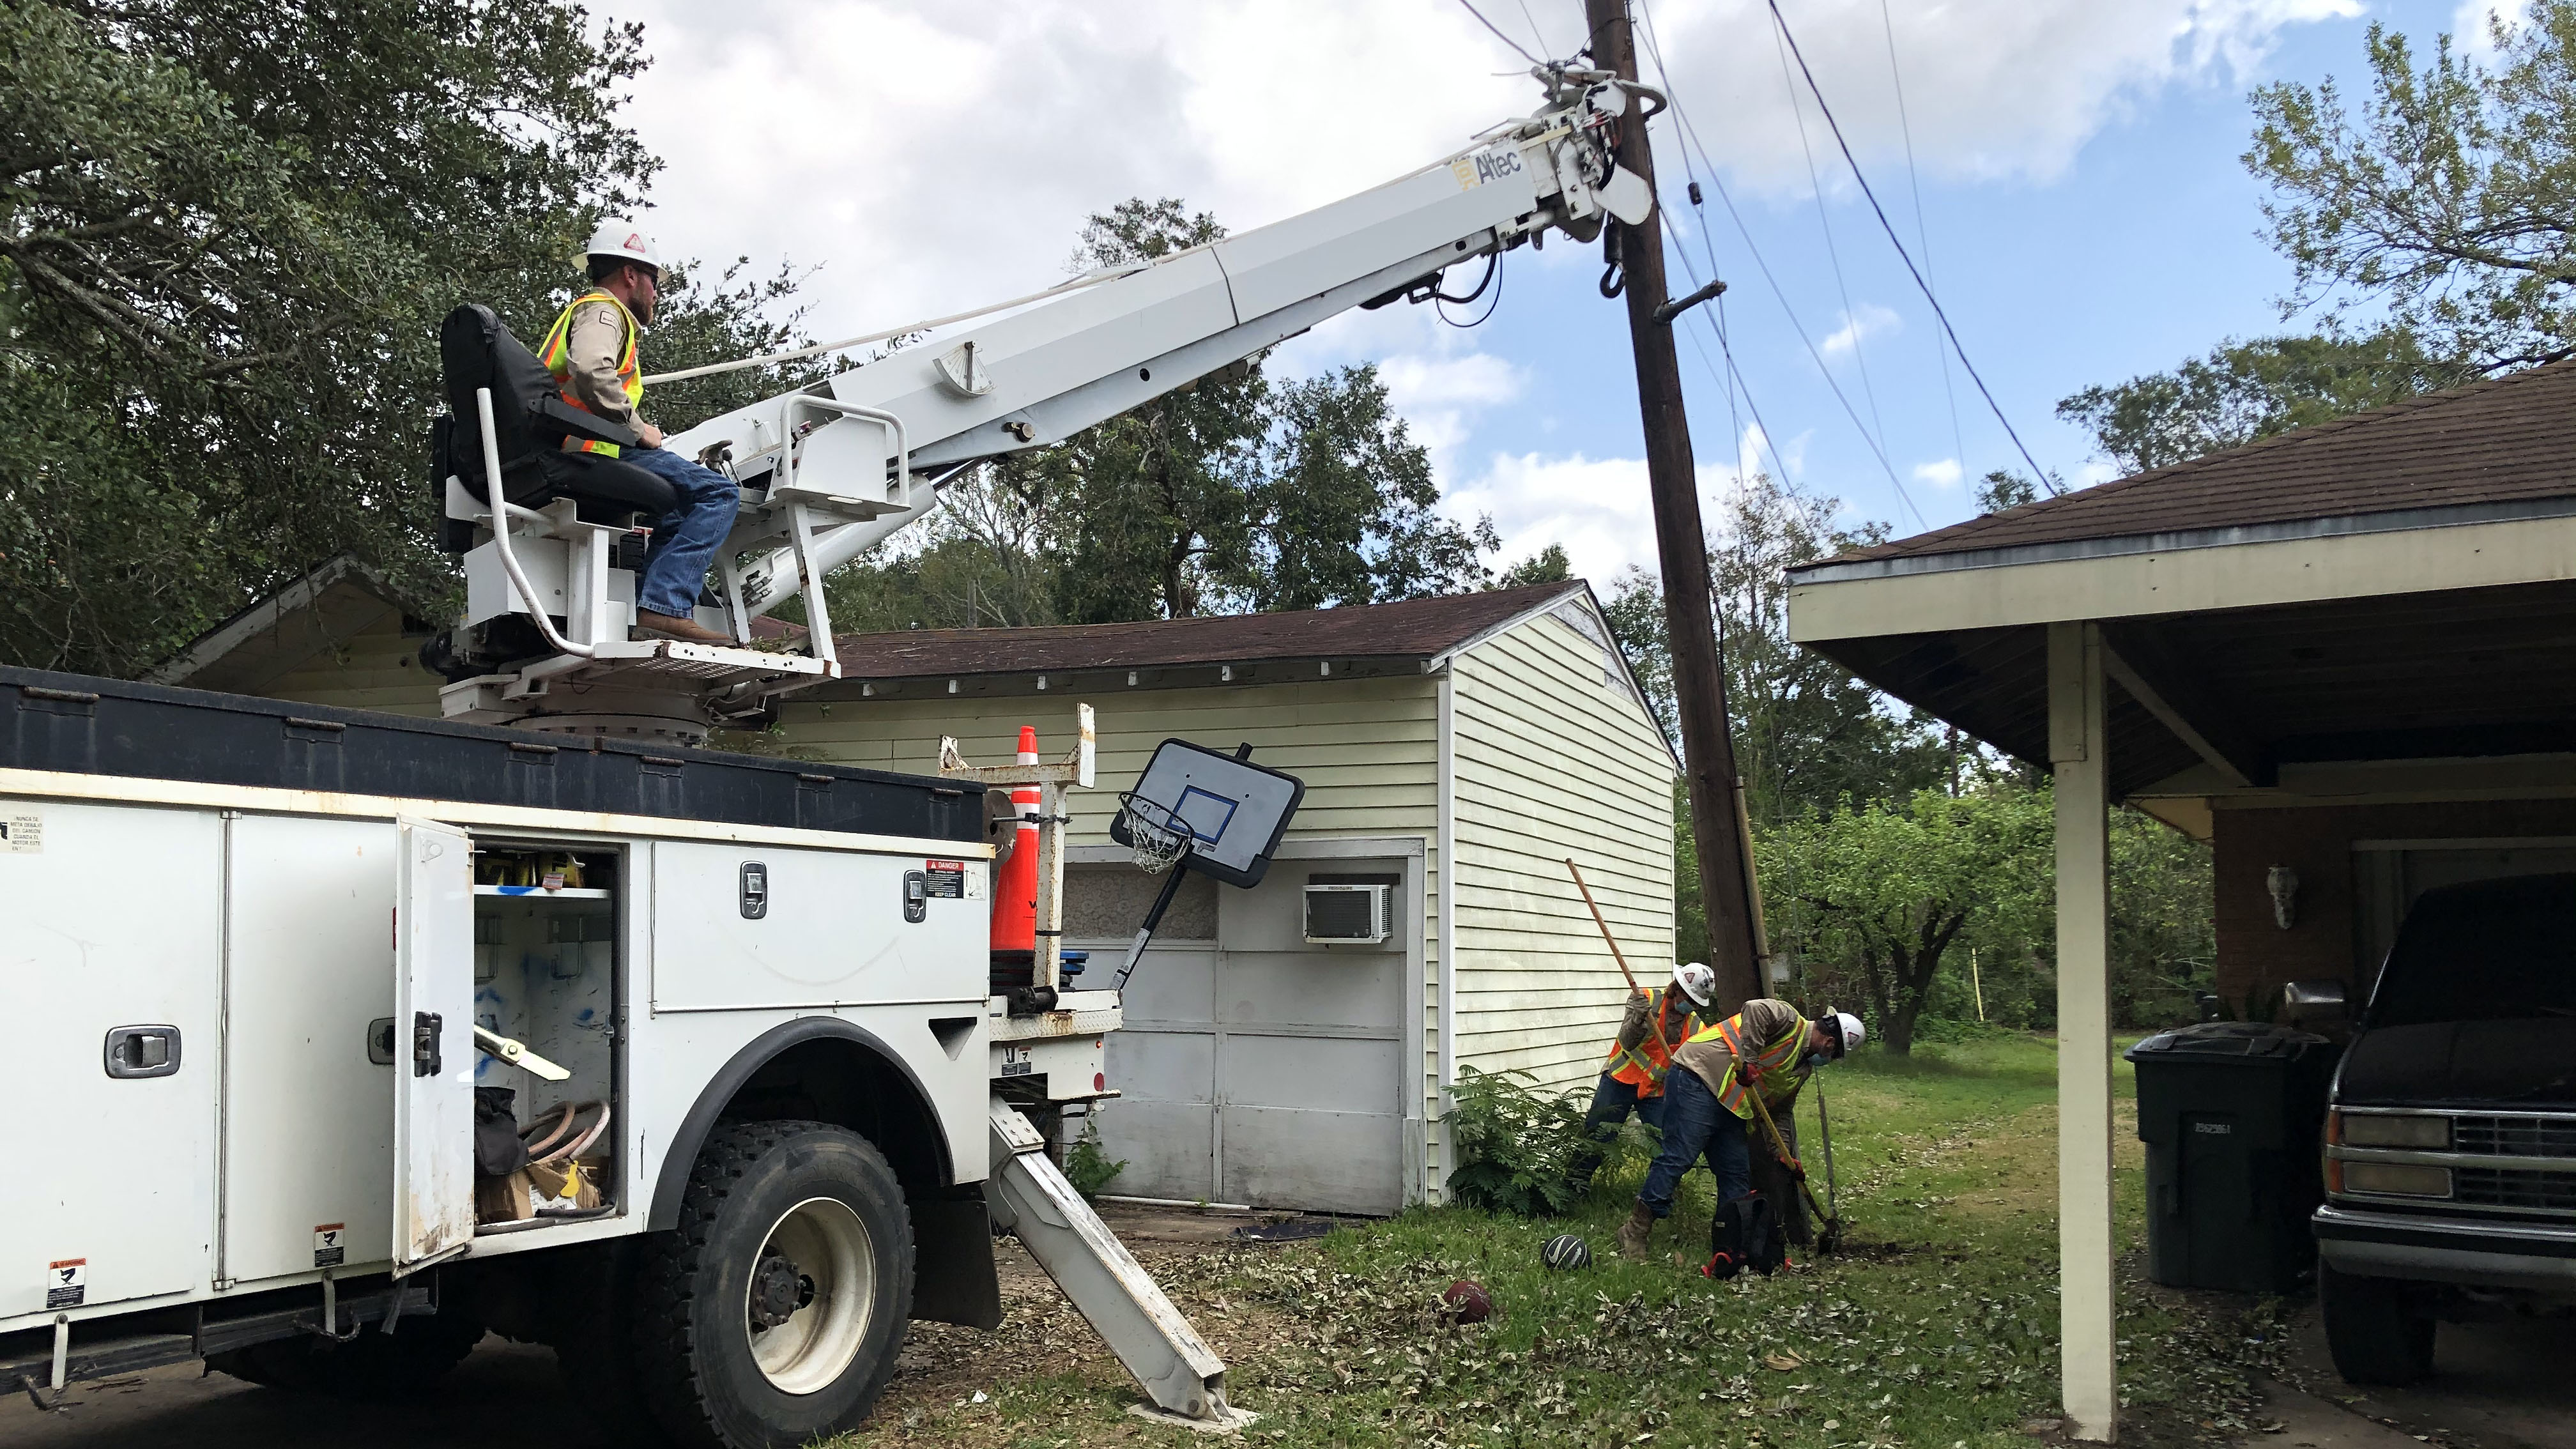 Entergy Texas Restores Power To 73 Of Customers Following Hurricane Delta